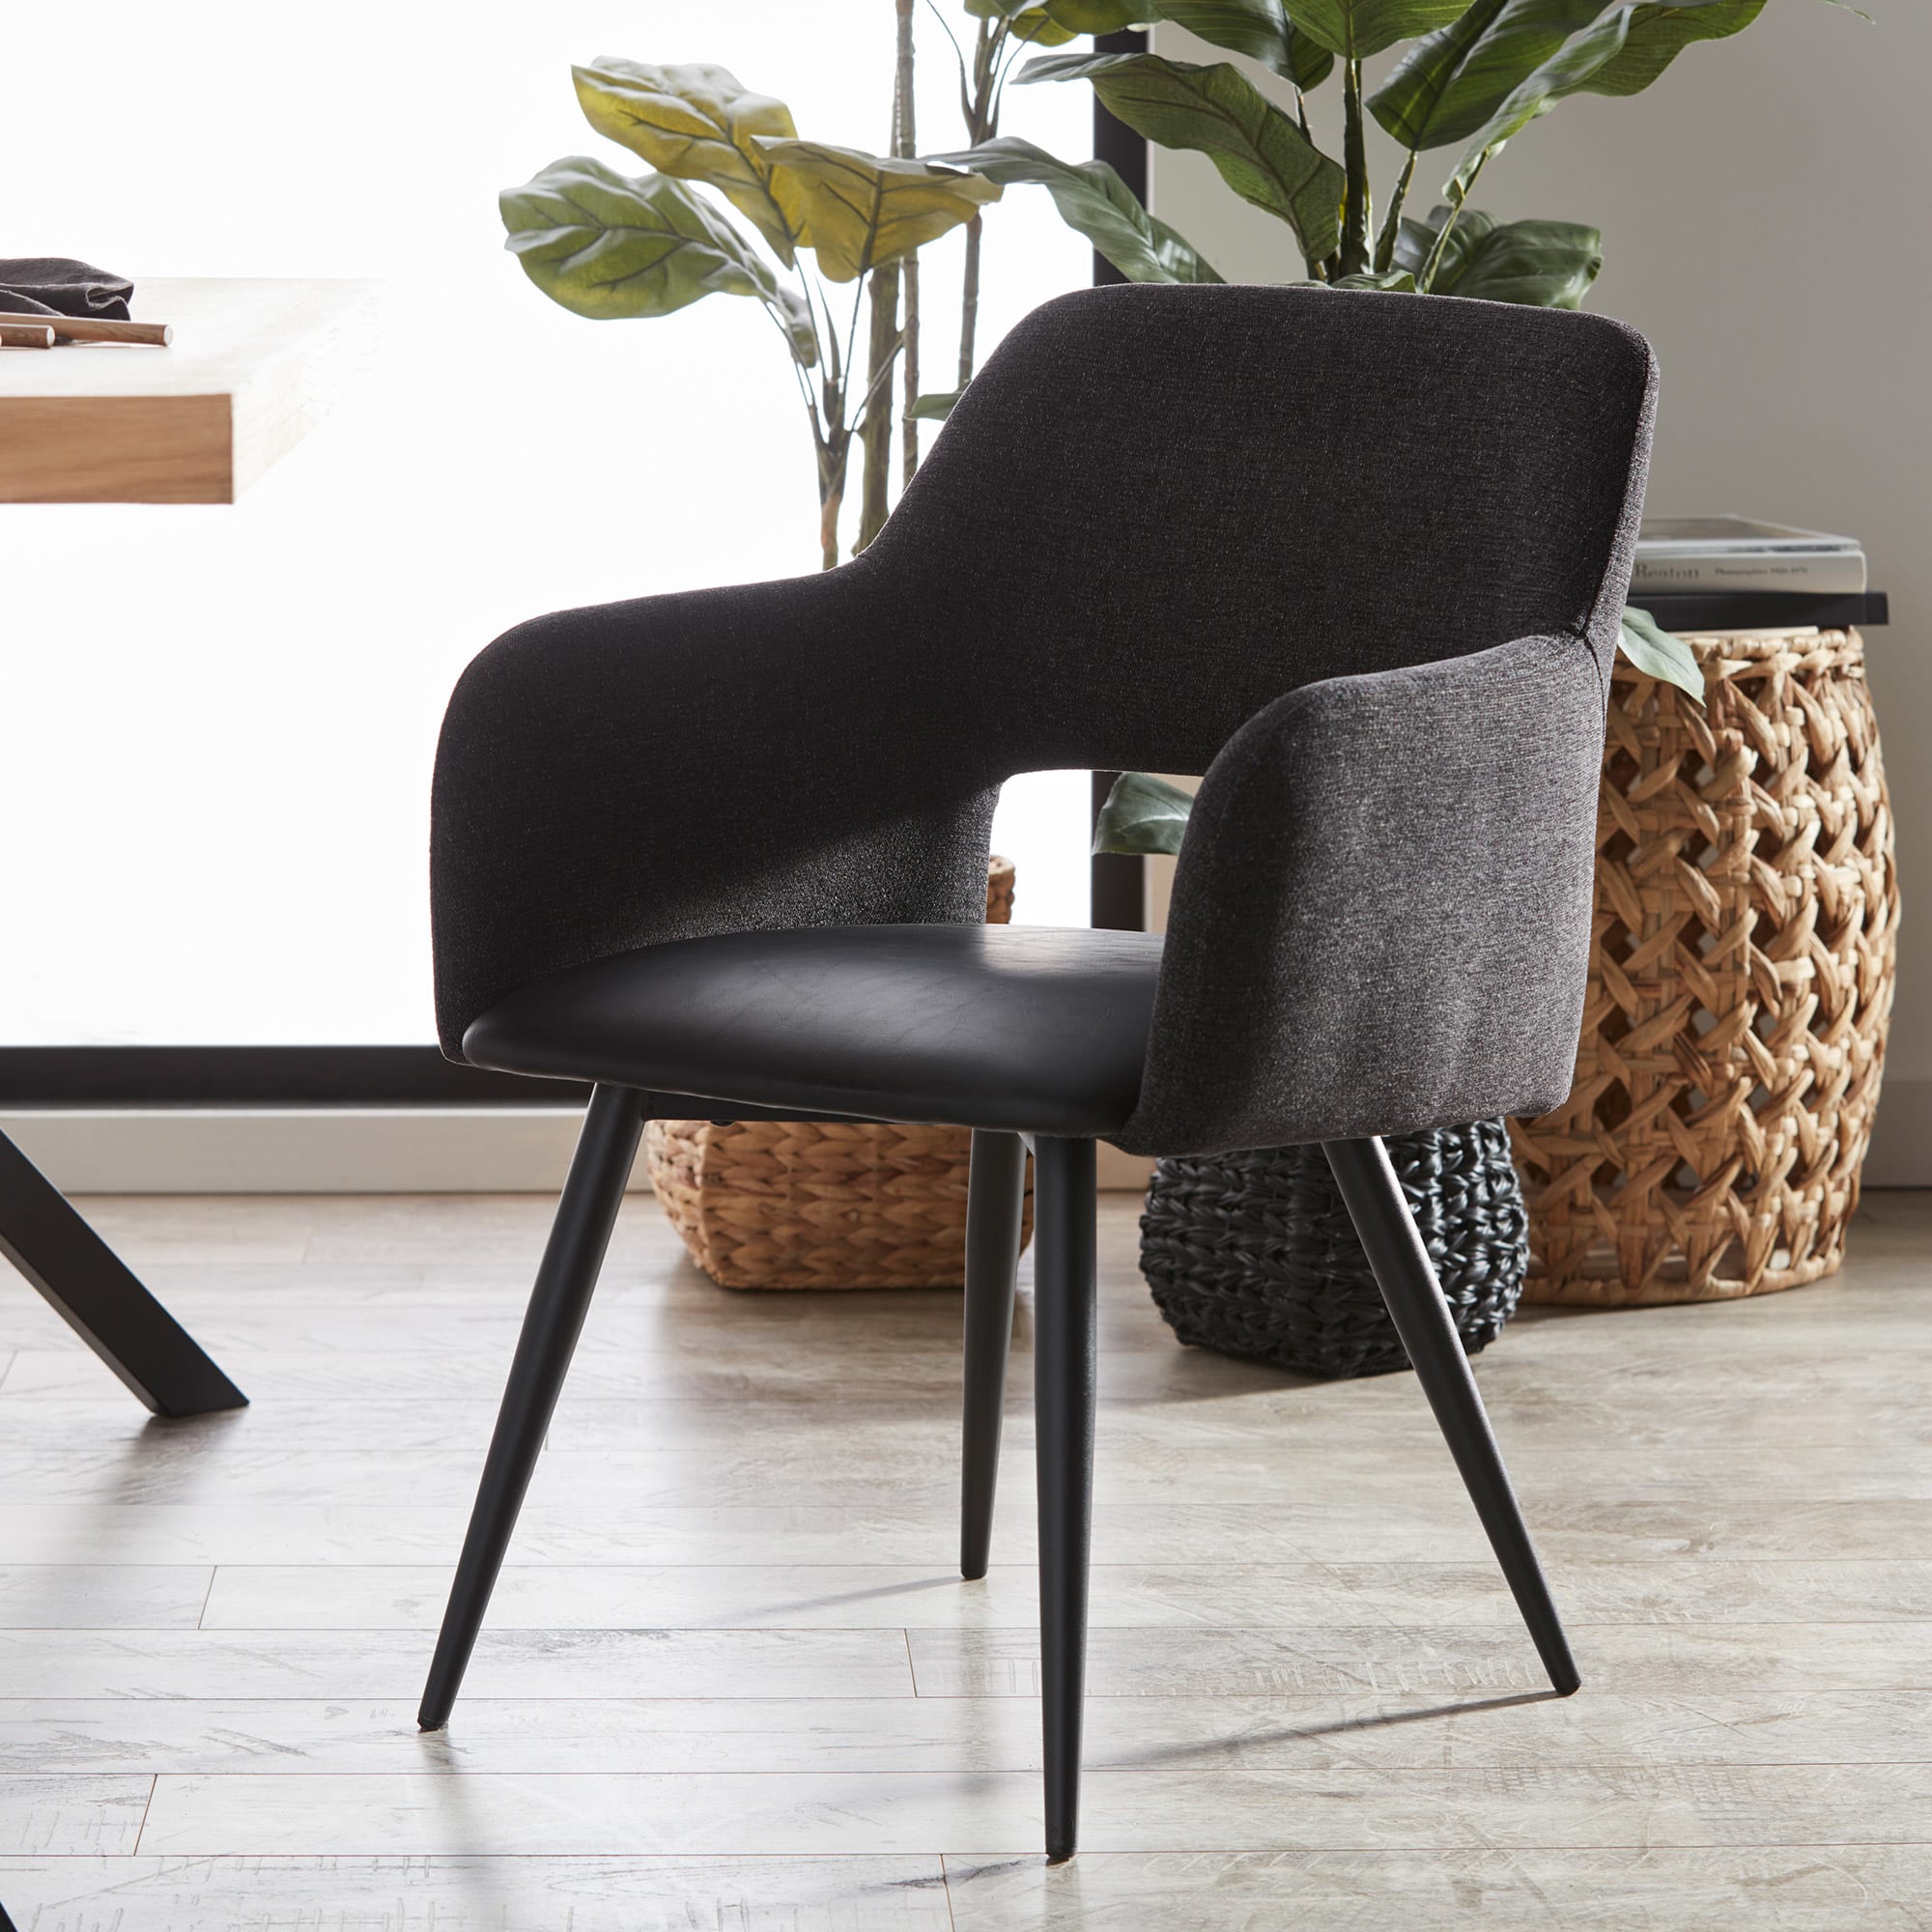 Fabric and Metal Dining Chair